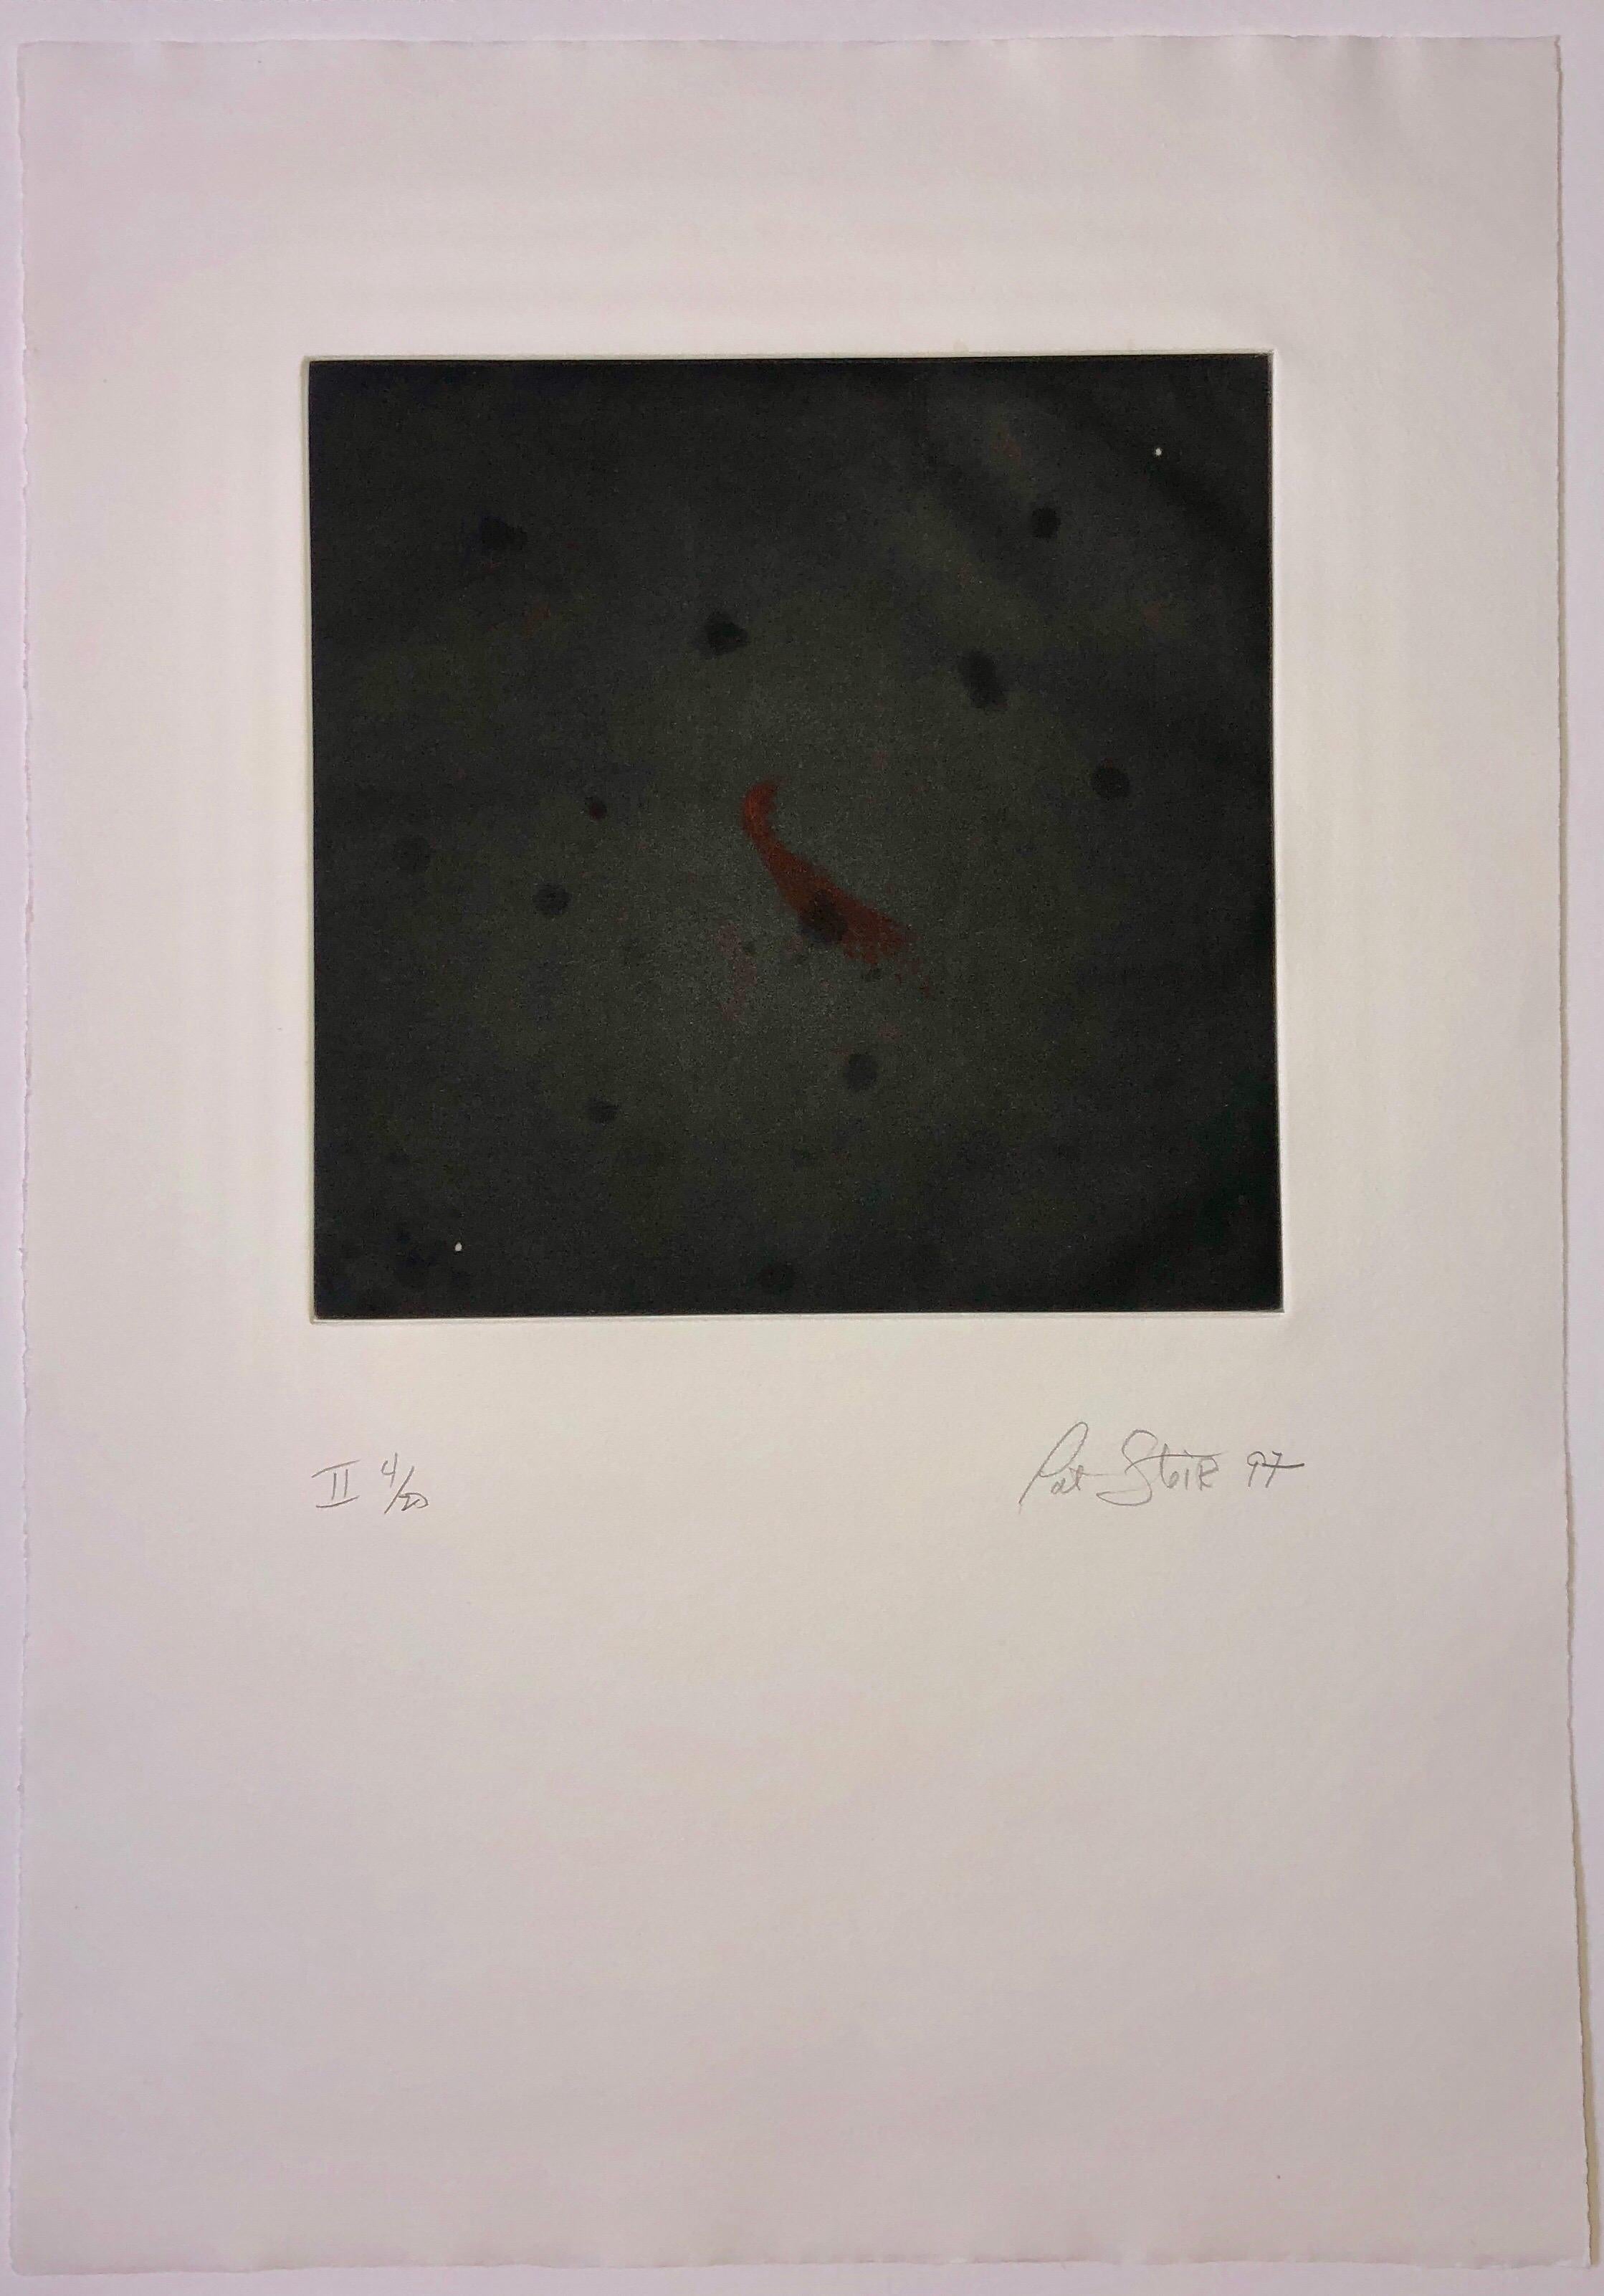 Comet, Outer Space Dark Series Aquatinte Etching Color Abstract Expressionist  en vente 2